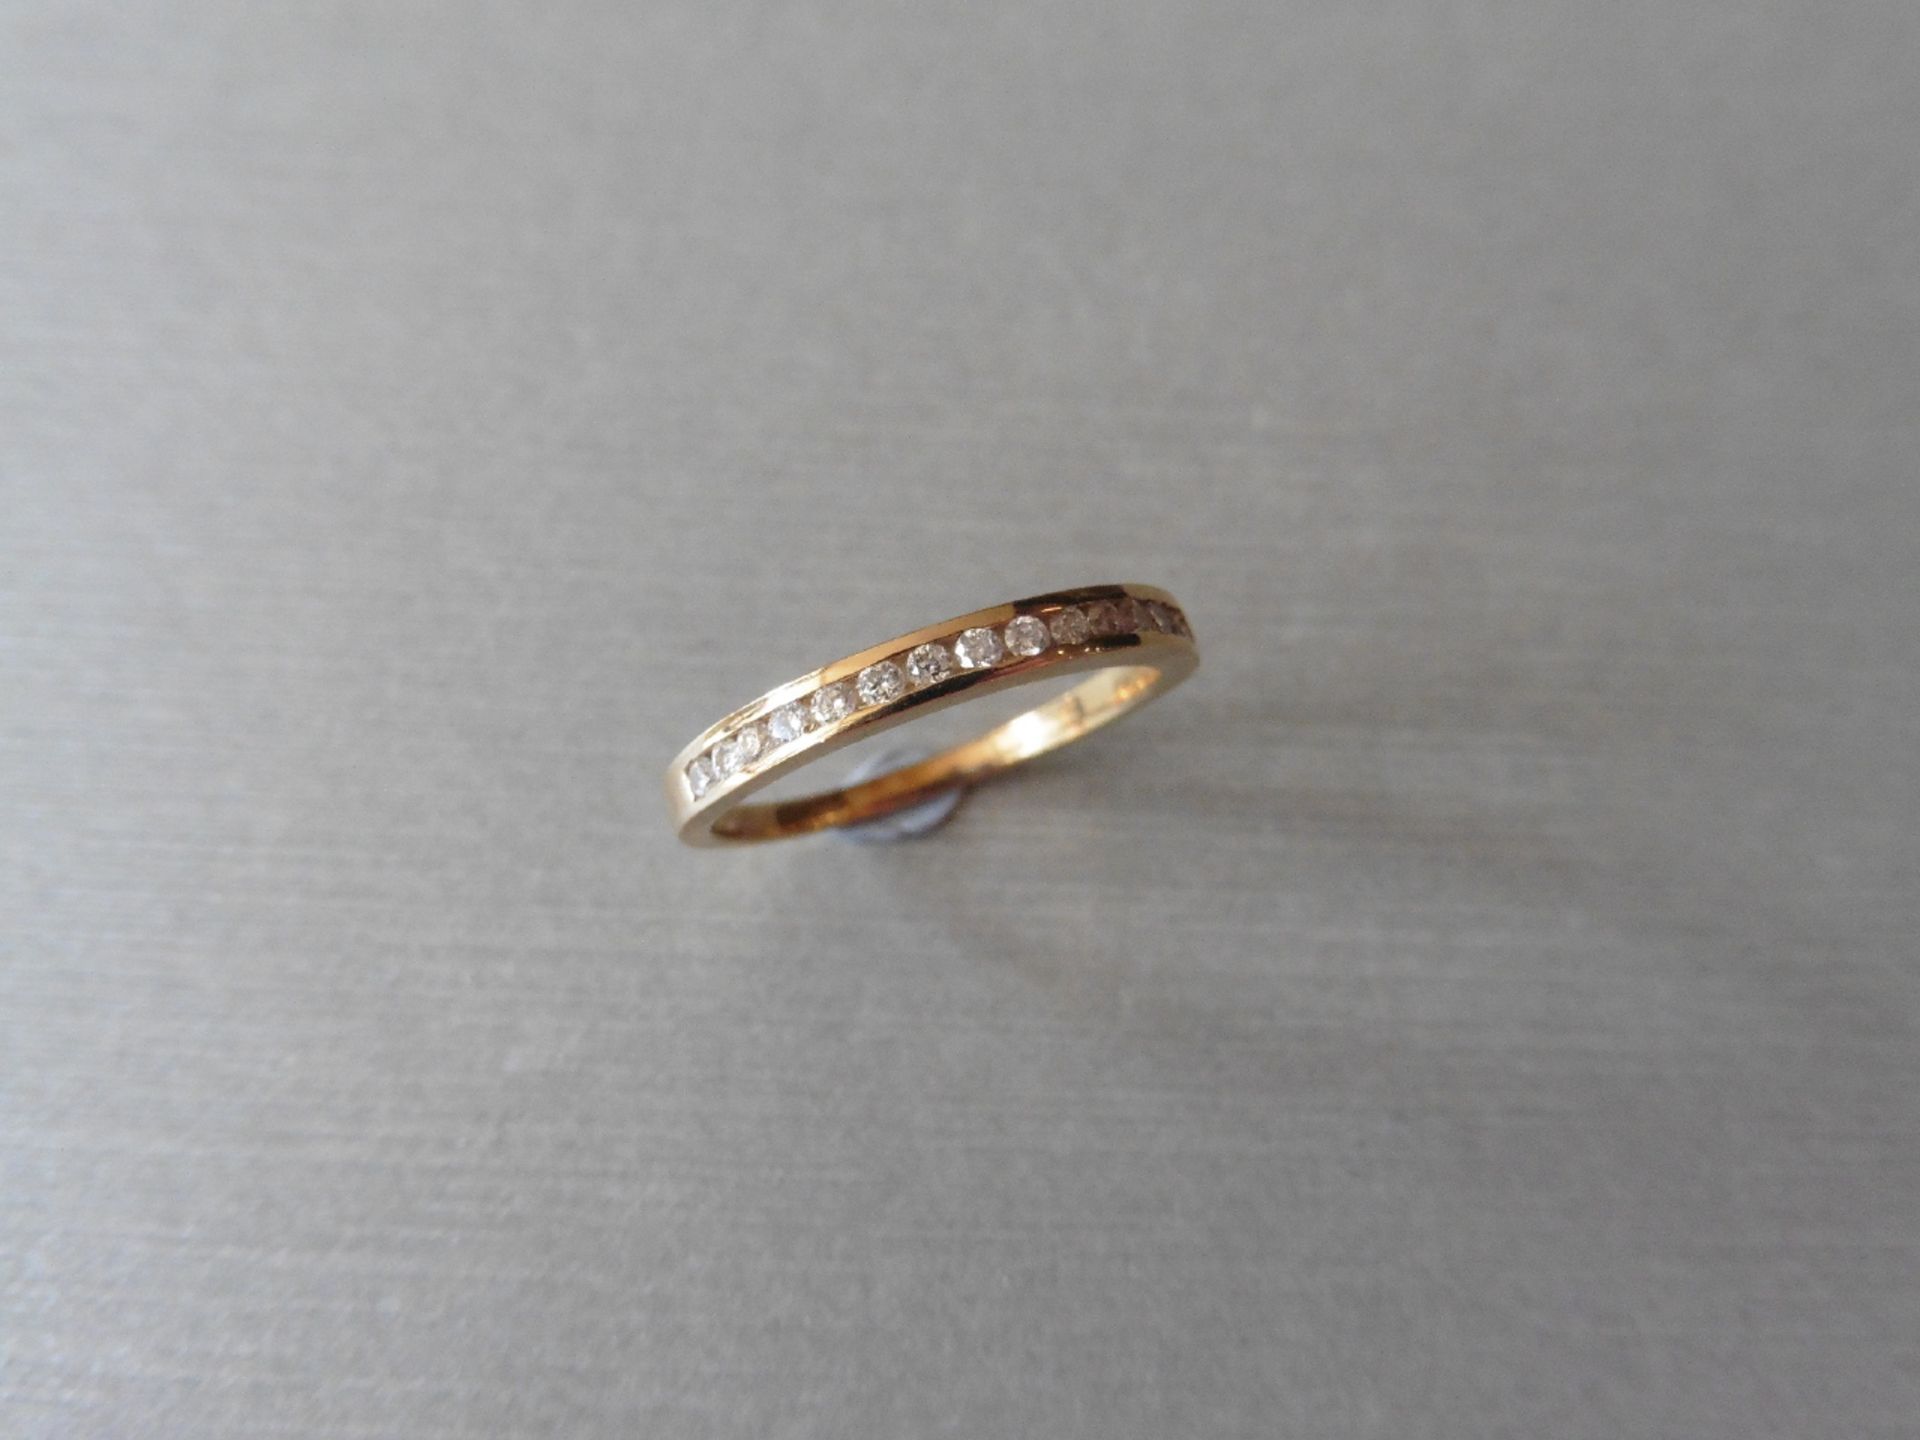 0.15ct diamond eternity ring set in 9ct rose gold. Channel setting, H,I colour, Si2 clarity. Ring